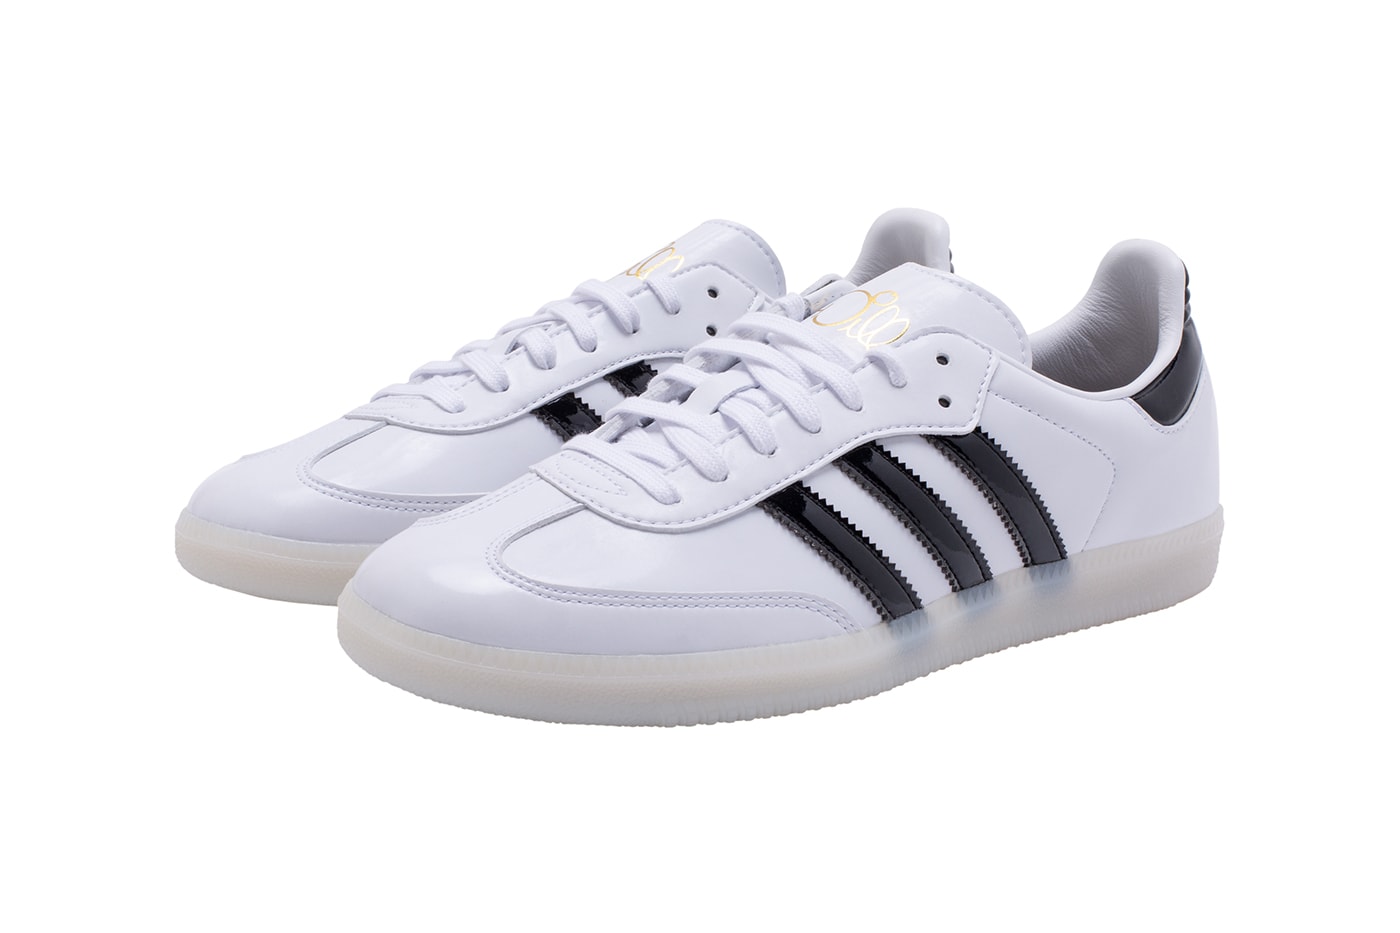 Jason Dill adidas Samba Patent Leather White Black Release Info IE5158 Date Buy Price Fucking Awesome